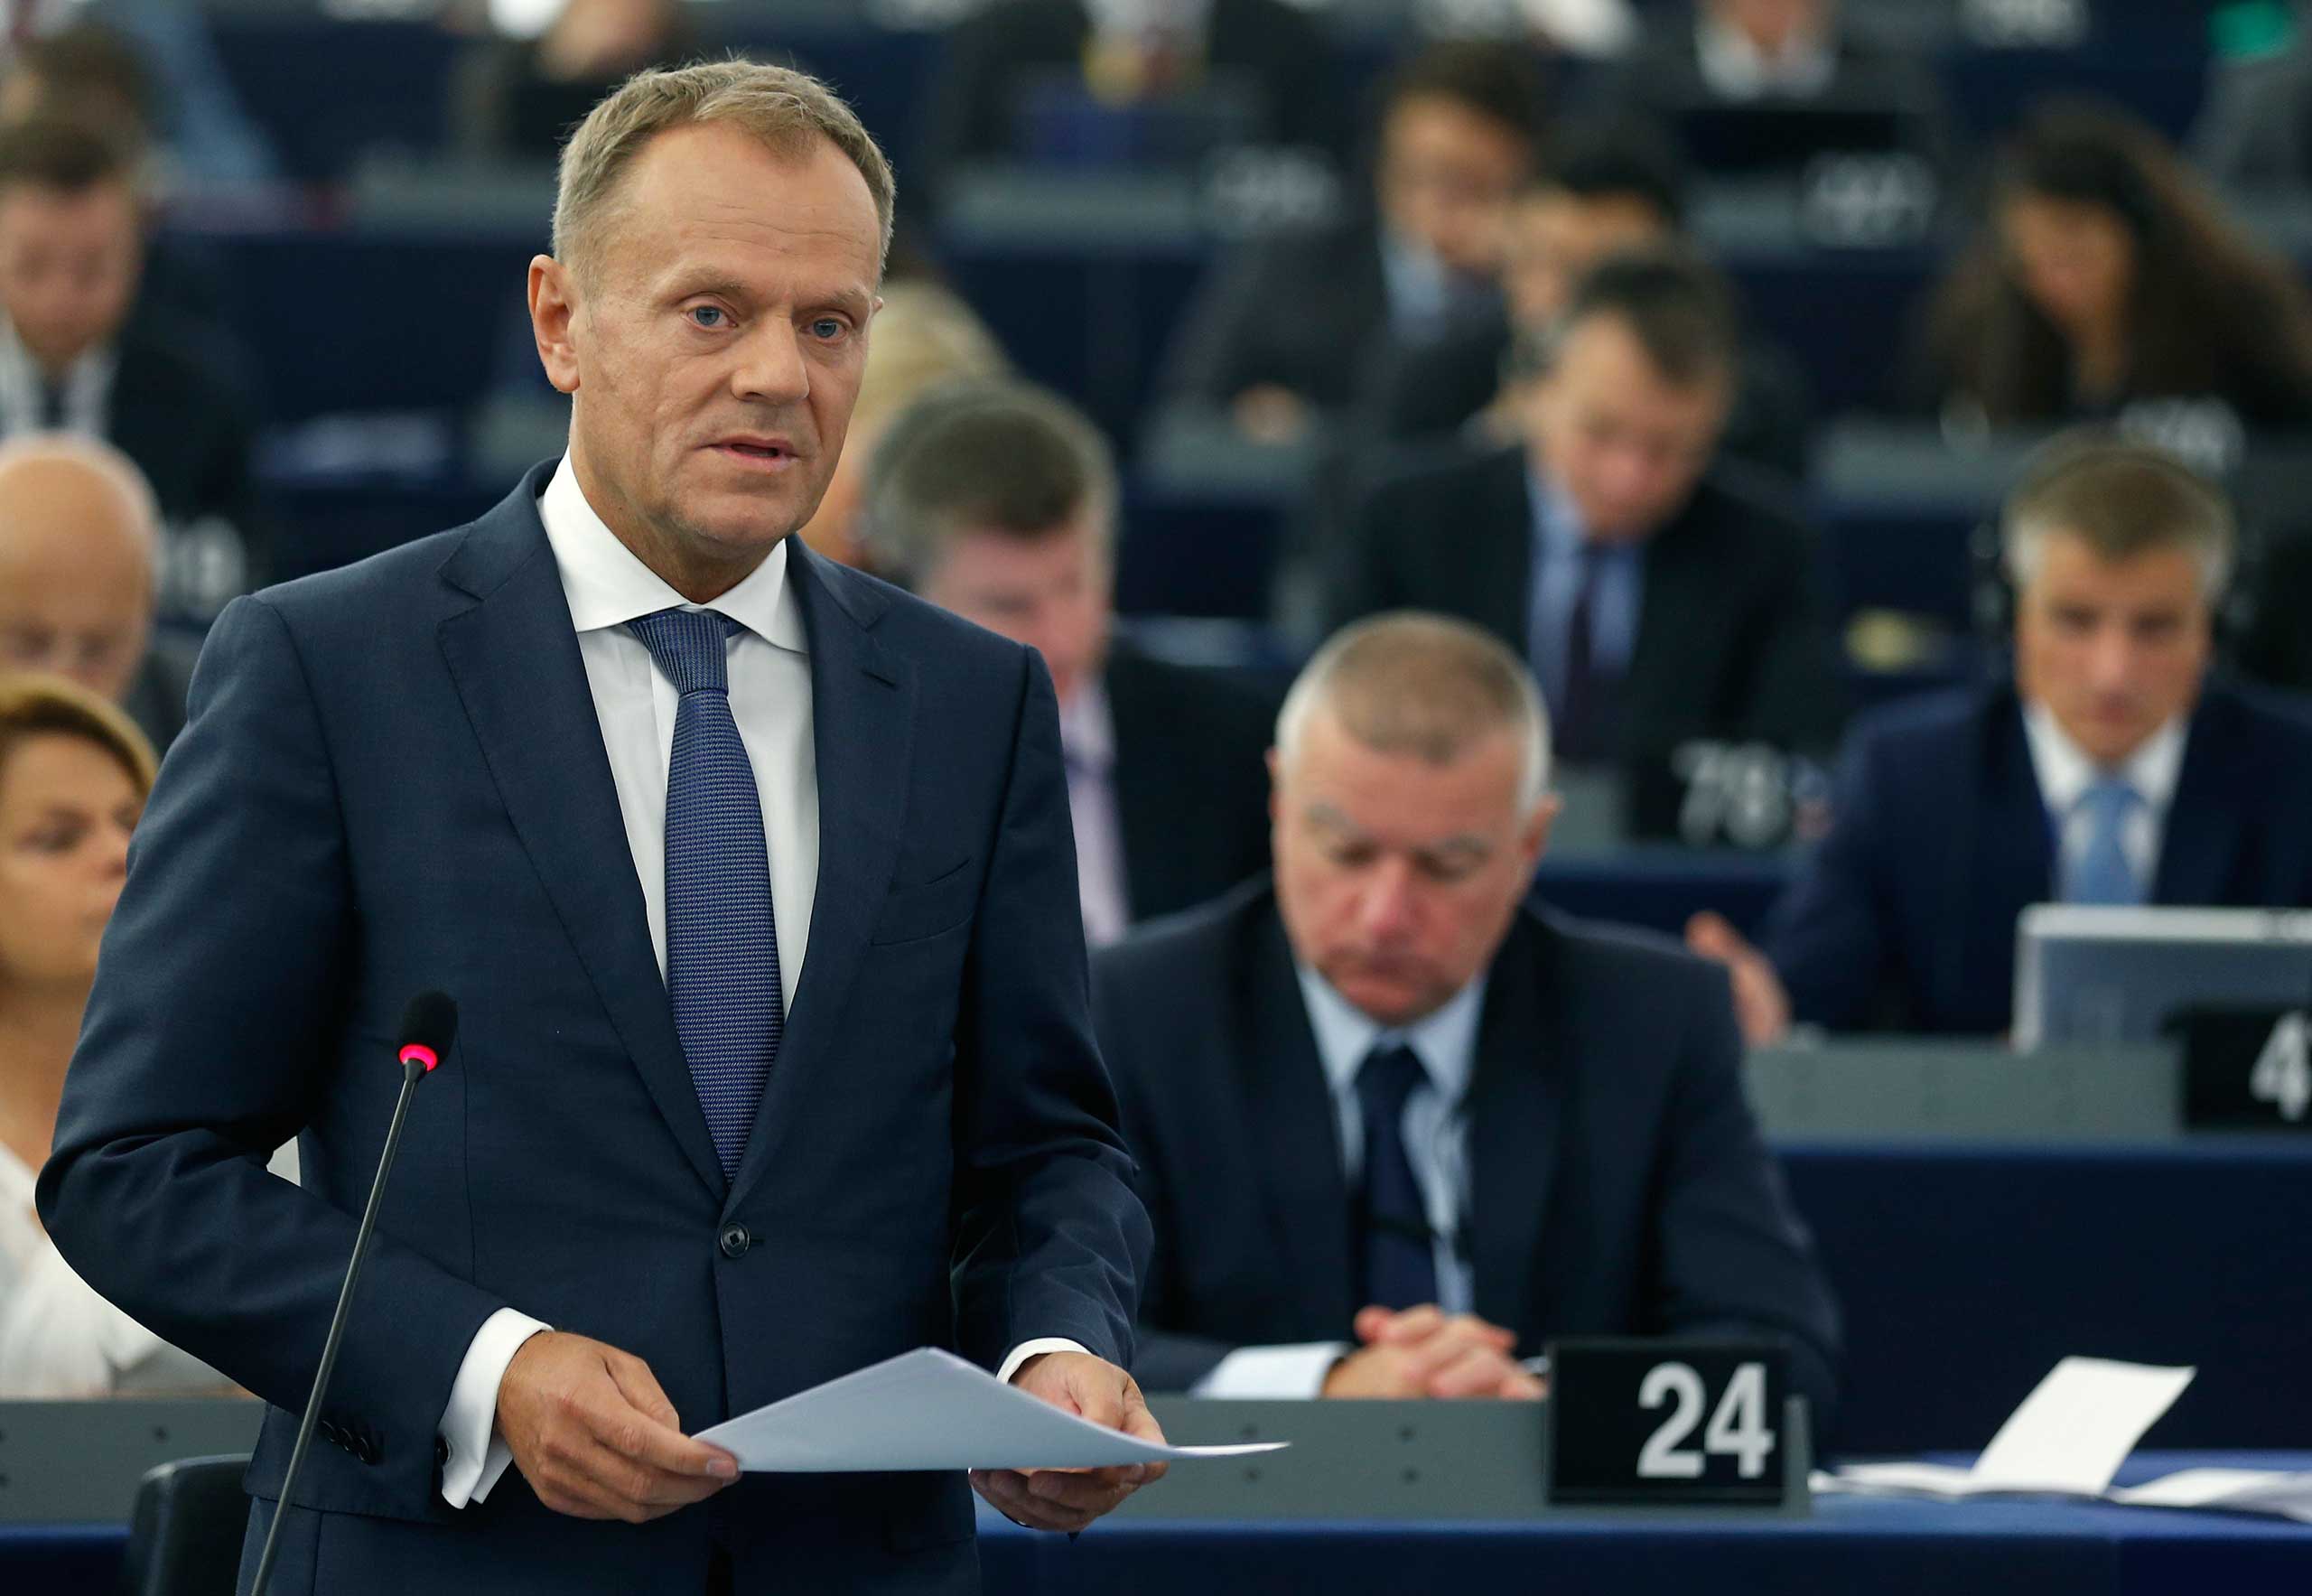 European Council President Donald Tusk addresses the European Parliament during a debate on the results of the last informal European Council, in Strasbourg, France, Oct. 6, 2015. (Vincent Kessler—Reuters)